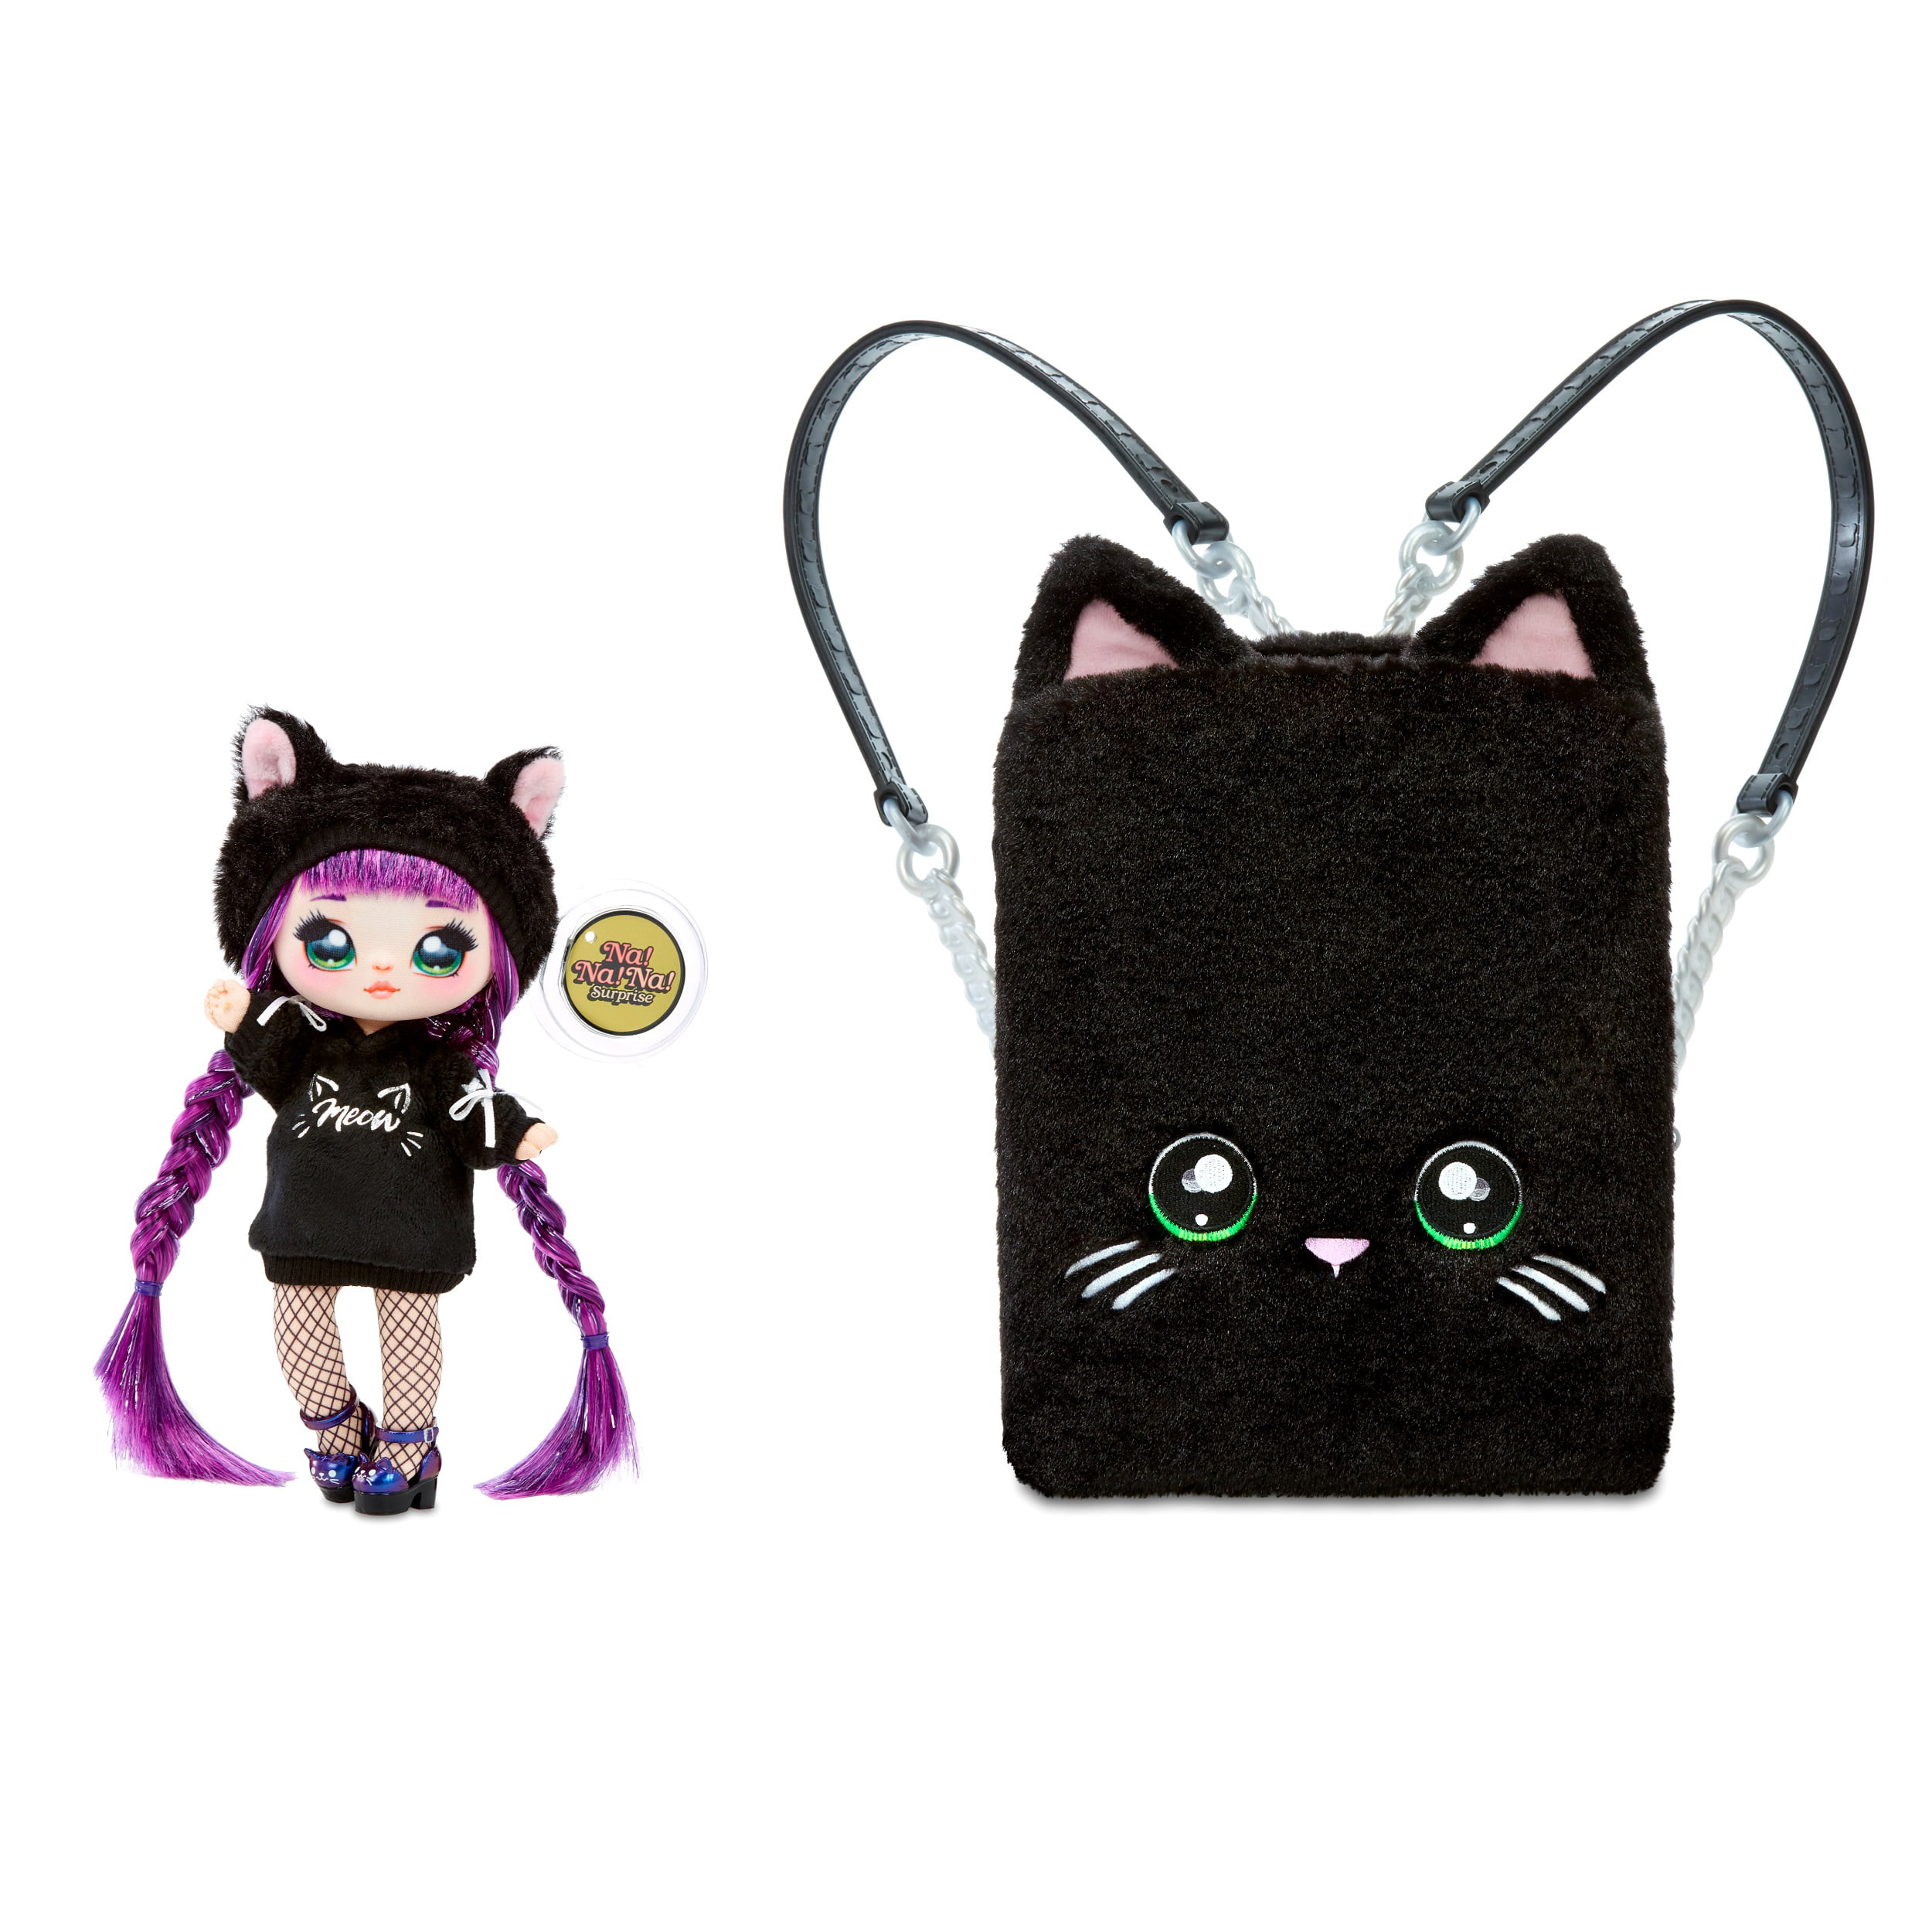 Na Surprise 3-in-1 Backpack Bedroom Black Kitty Playset with Limited Edition Doll Na MGA Entertainment Na